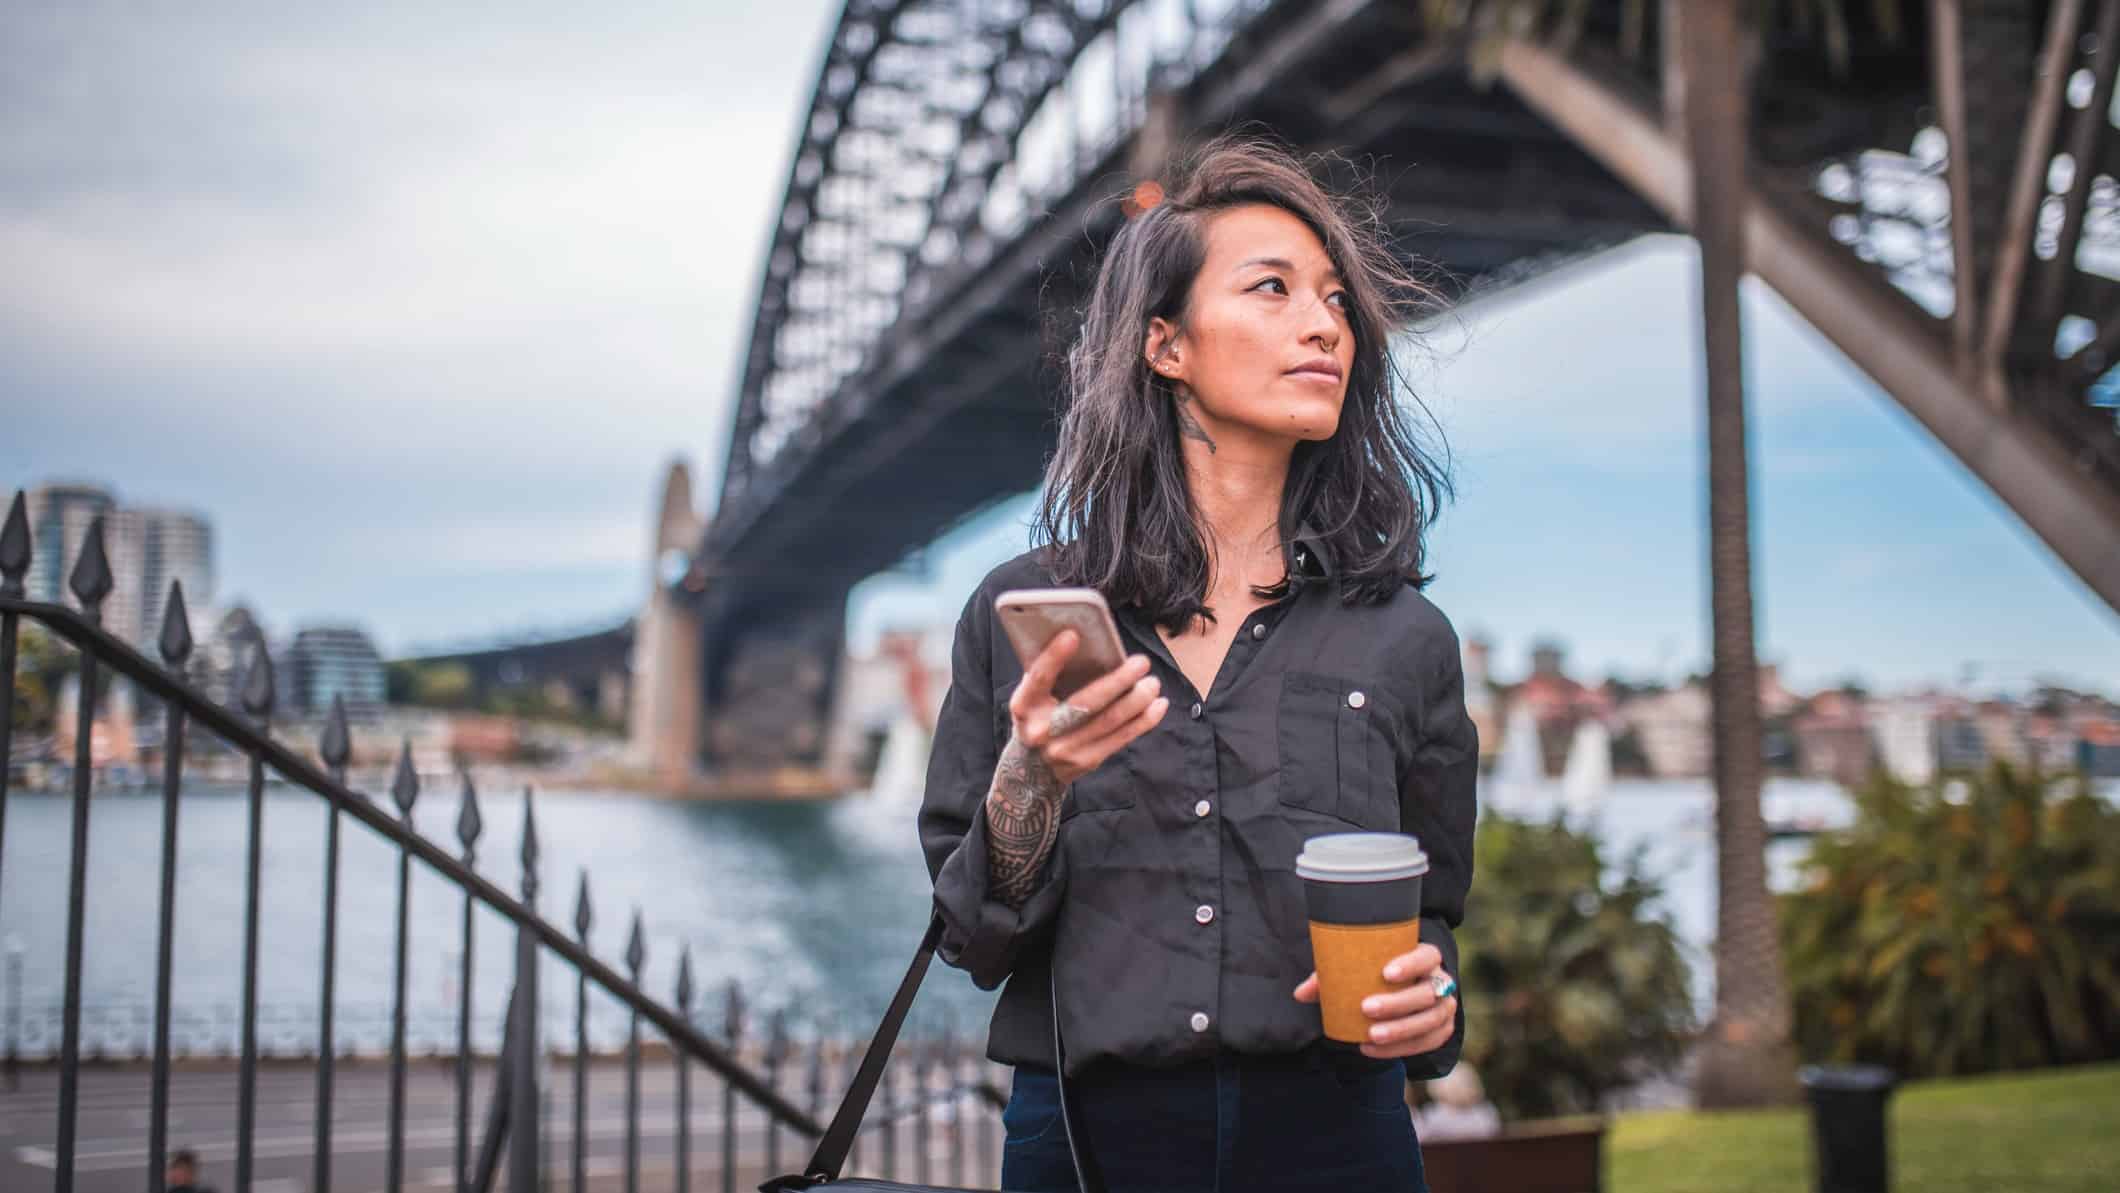 a woman wearing dark clothing and sporting a few tatoos and piercings holds a phone and a takeaway coffee cup as she strolls under the Sydney Harbour Bridge which looms in the background.